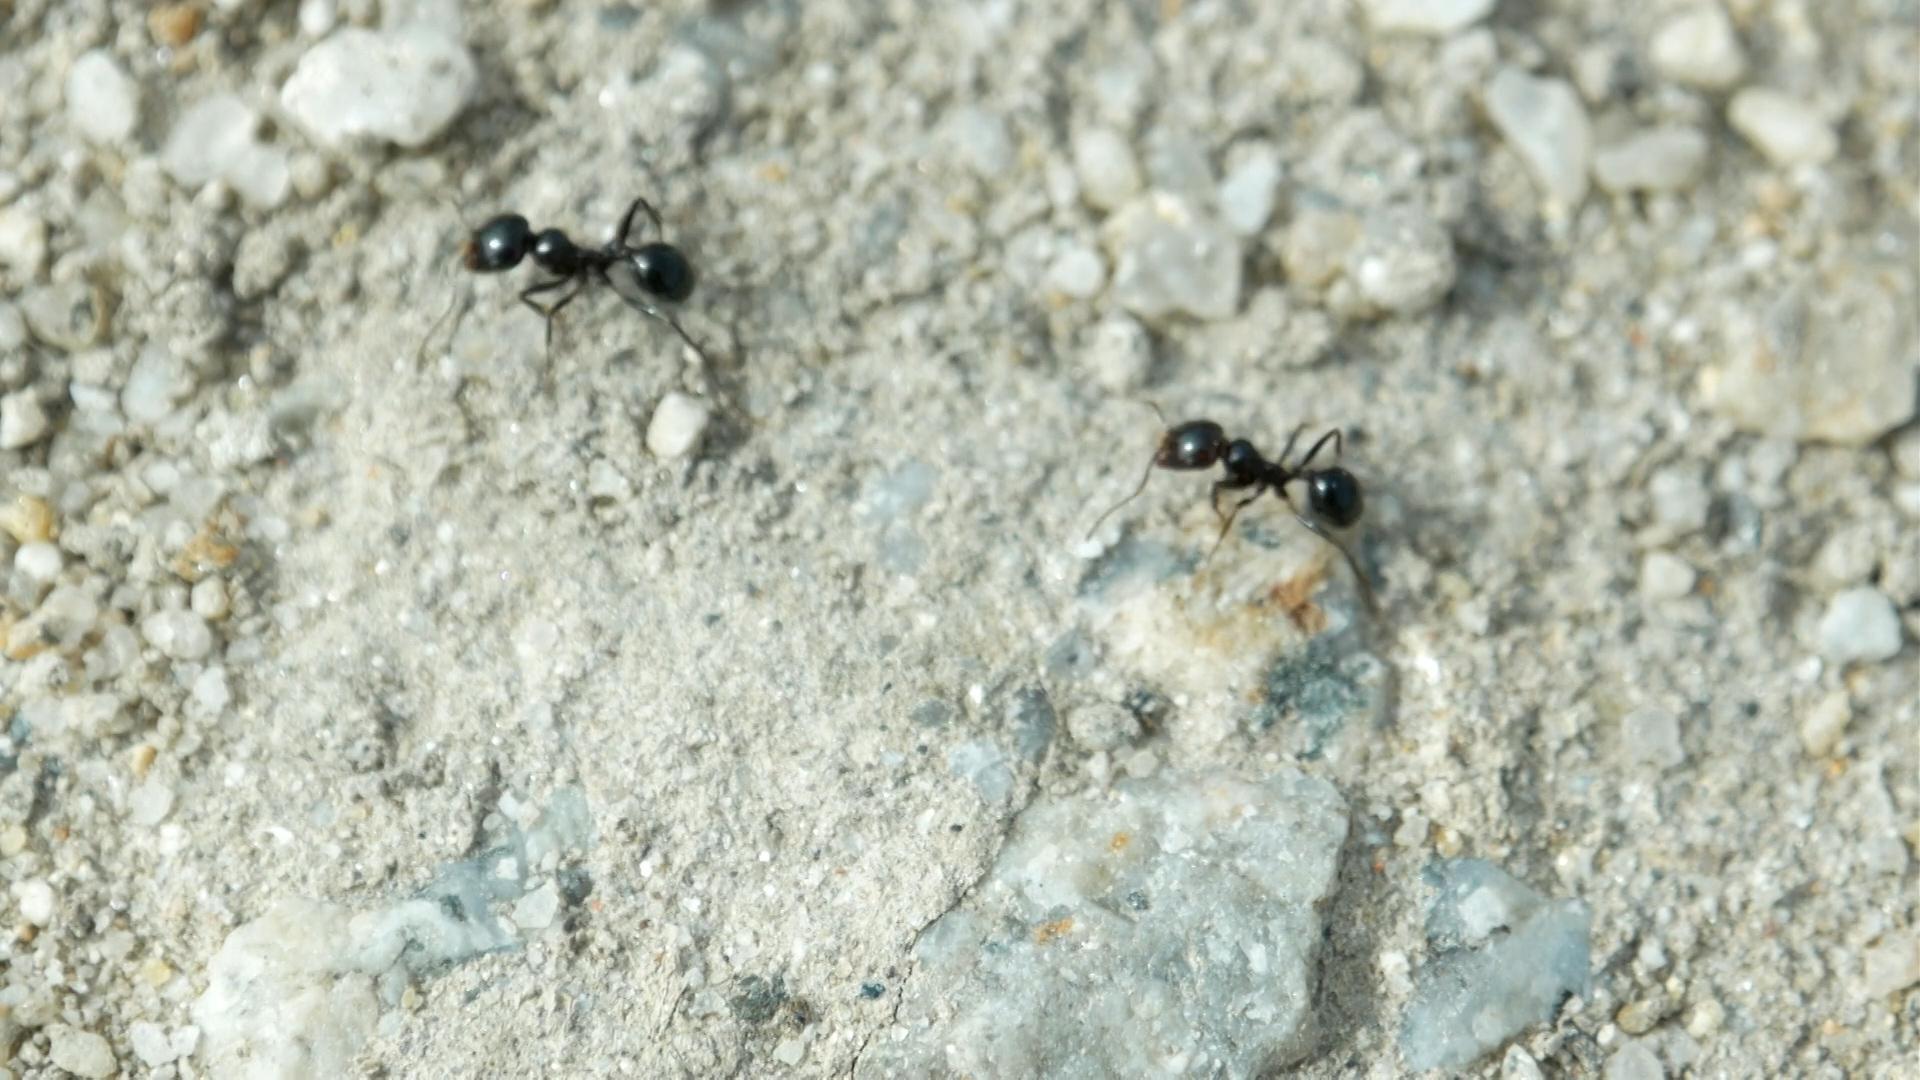 20 Effective Methods to Get Rid of Ants Naturally